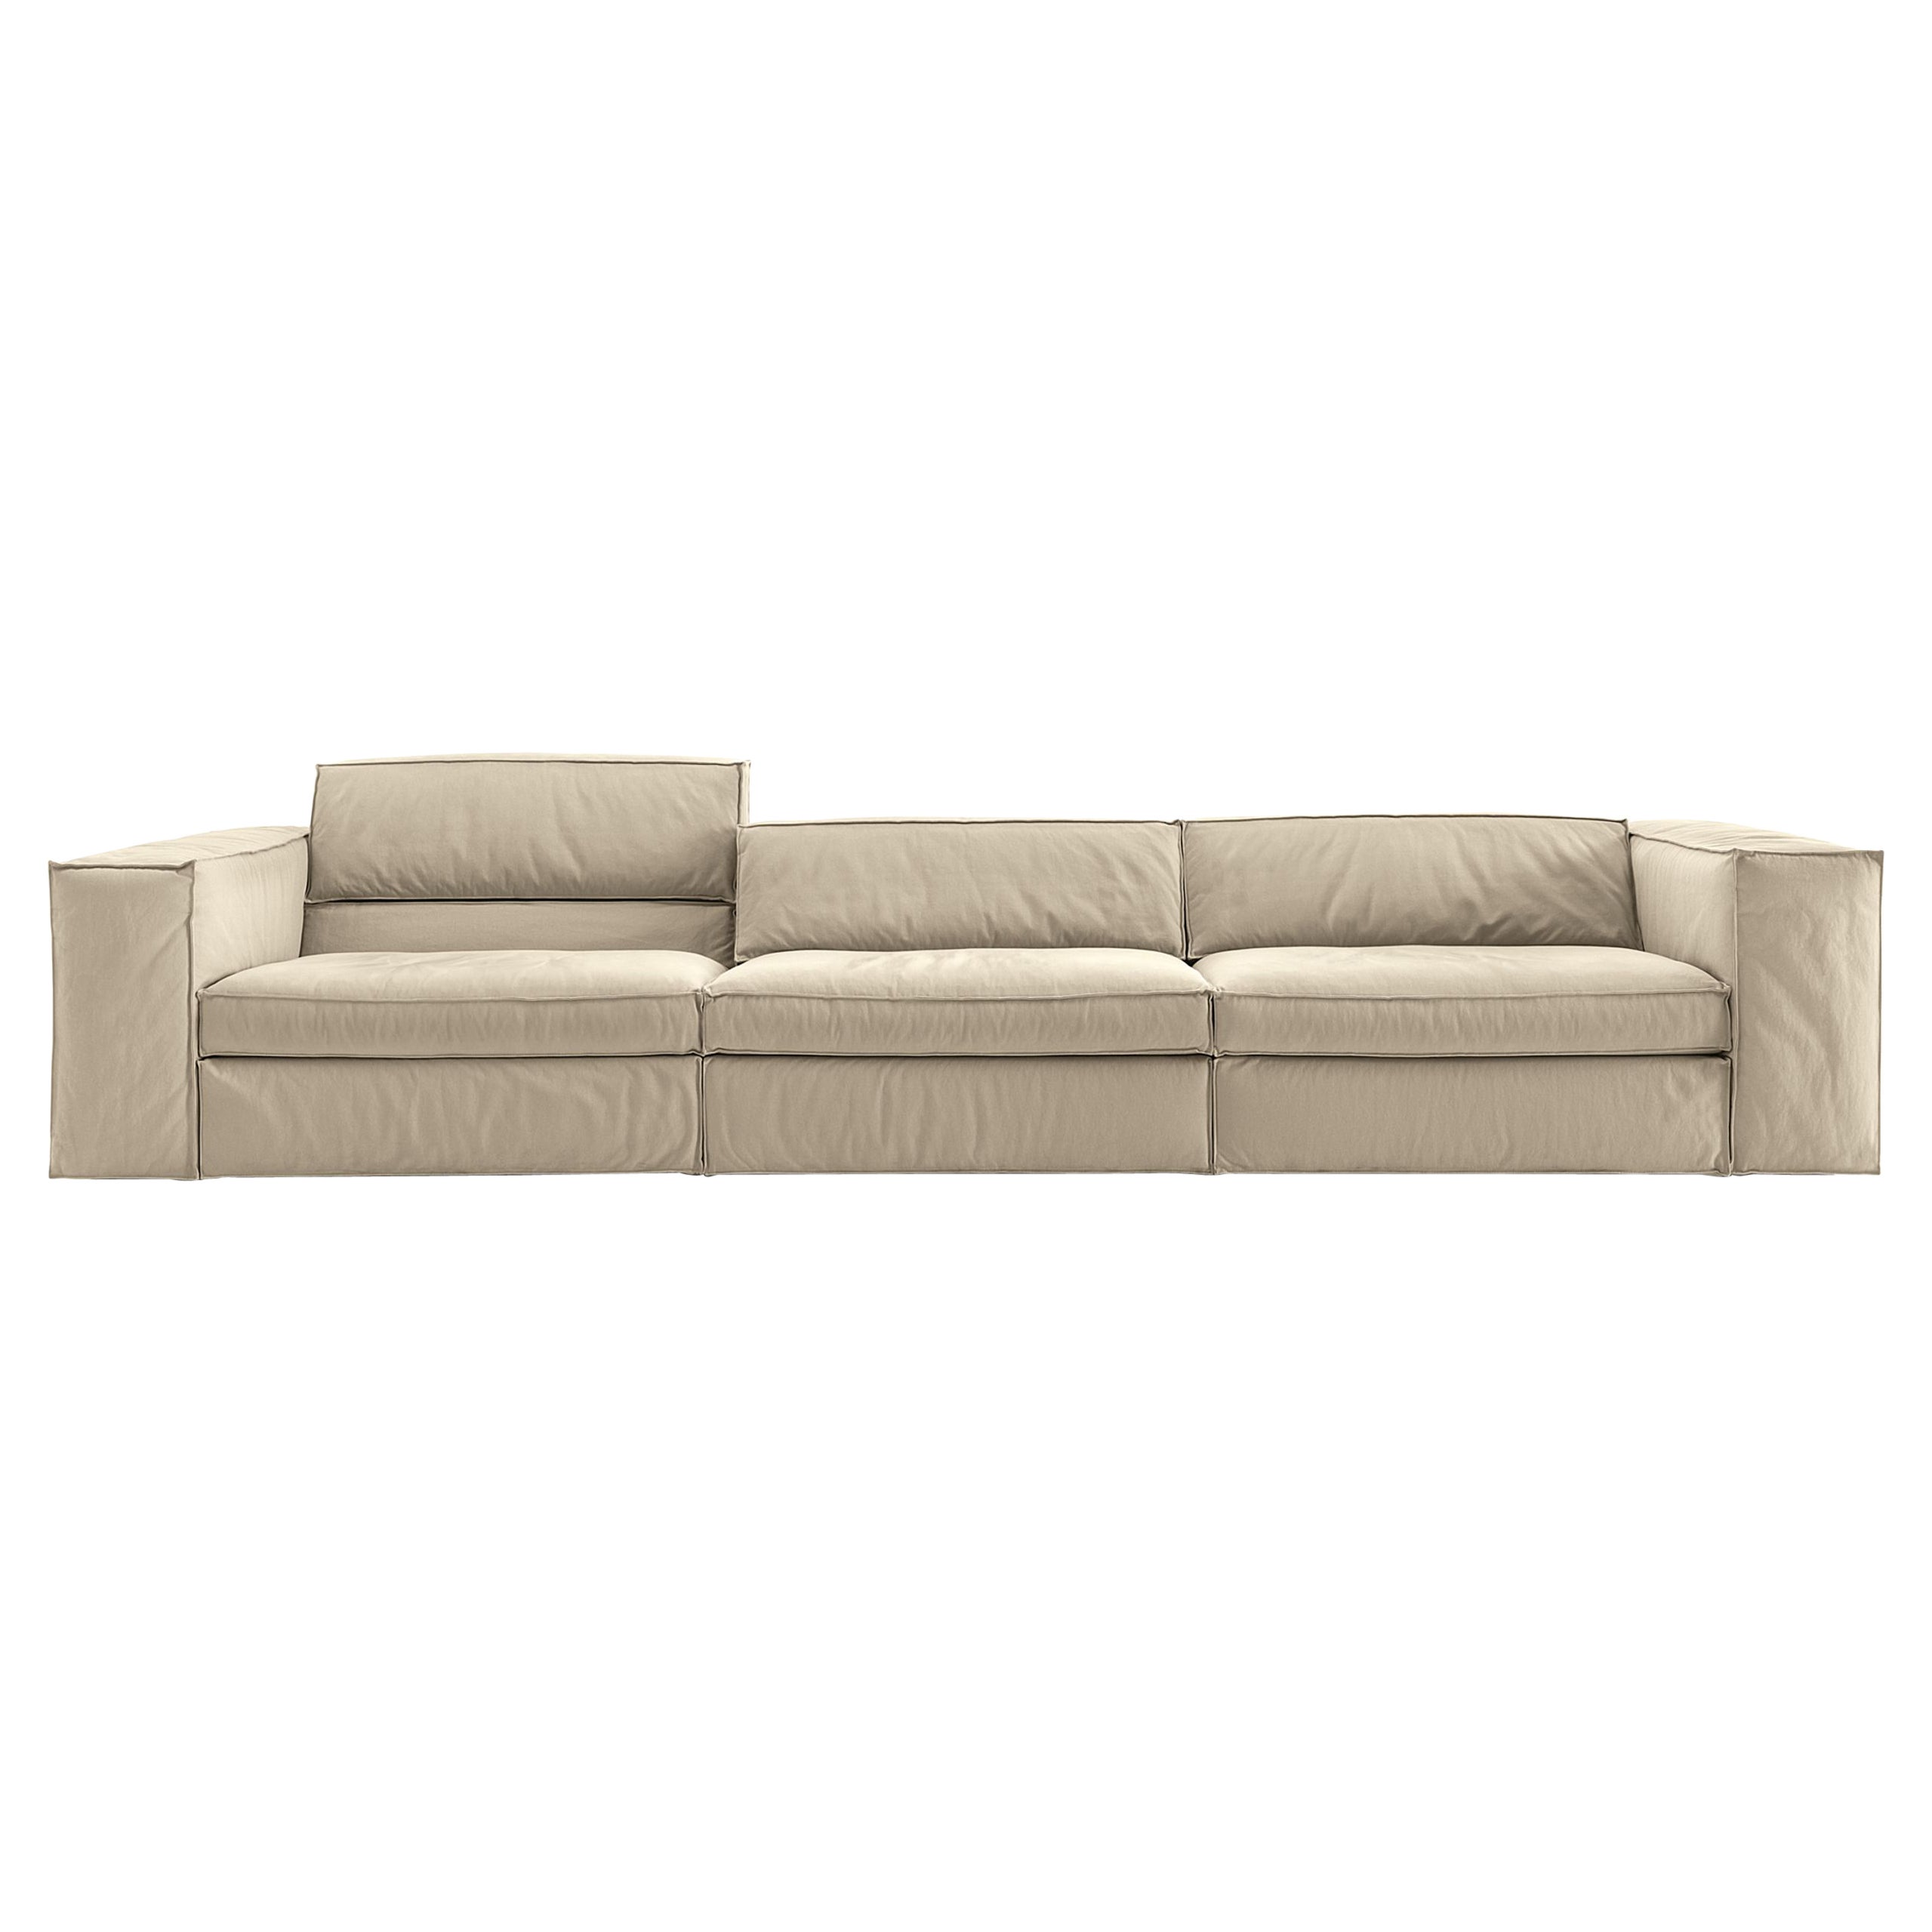 Up Large Modular Sofa in AT192 Beige Upholstery by Giuseppe Viganò For Sale